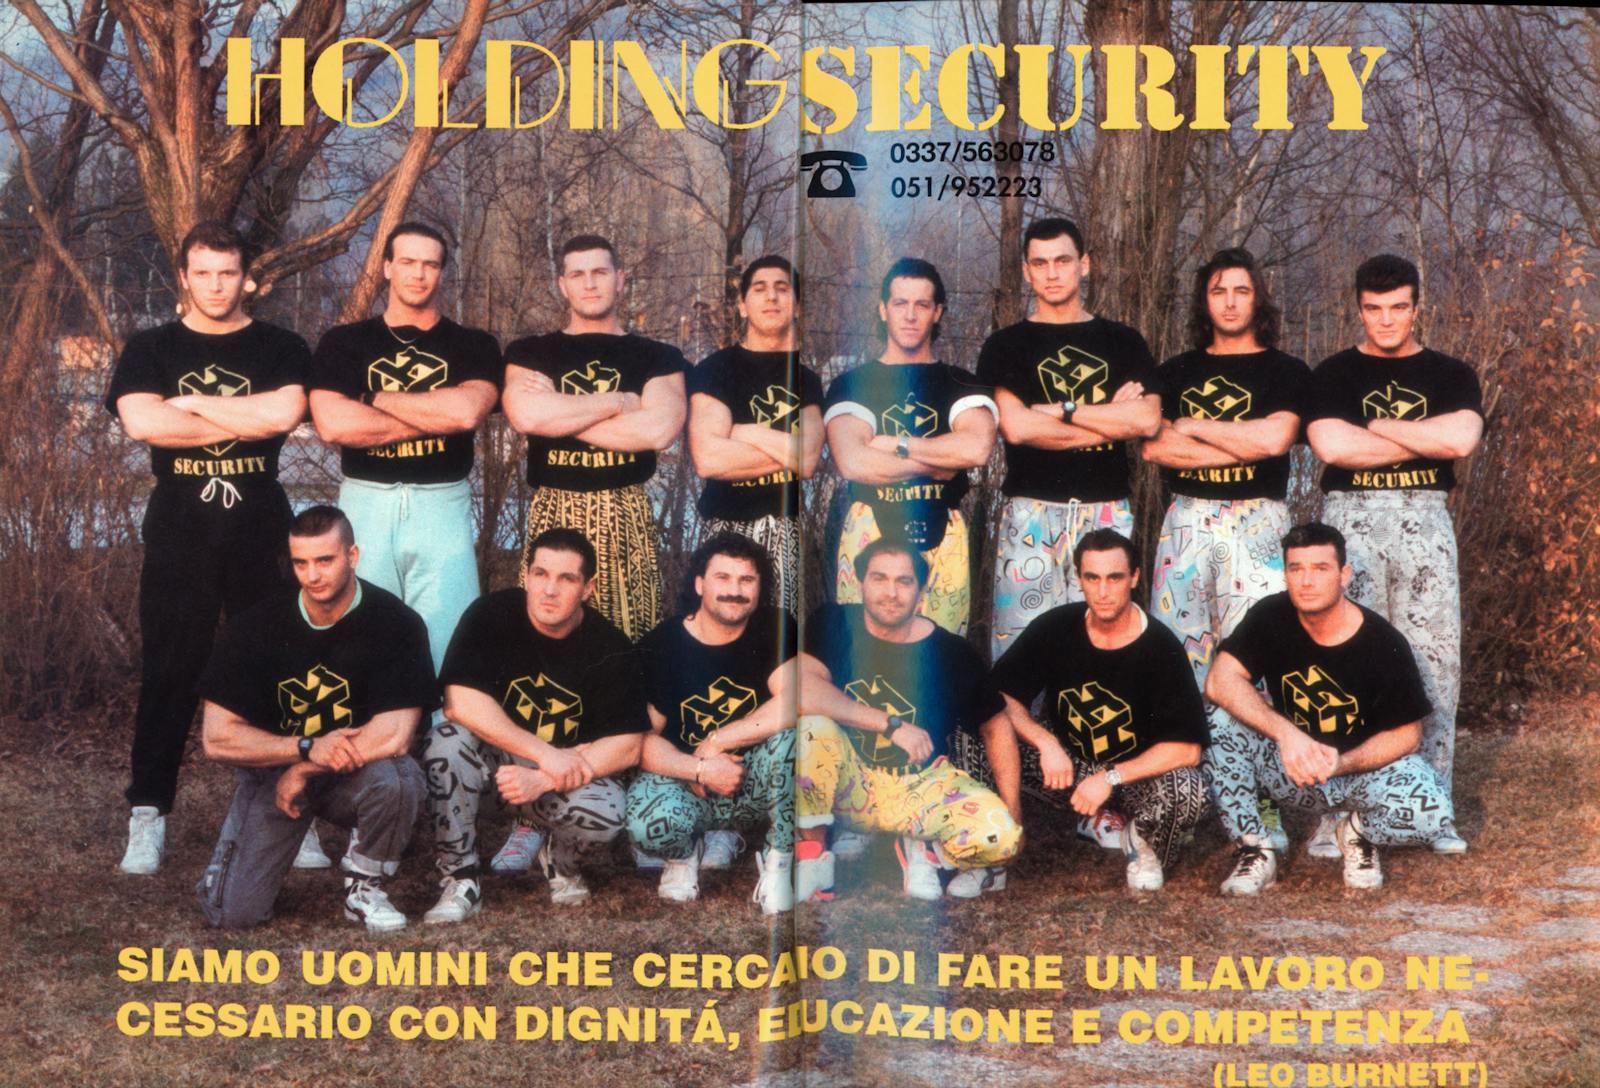 Pubblicità Holding Security: Holding Security